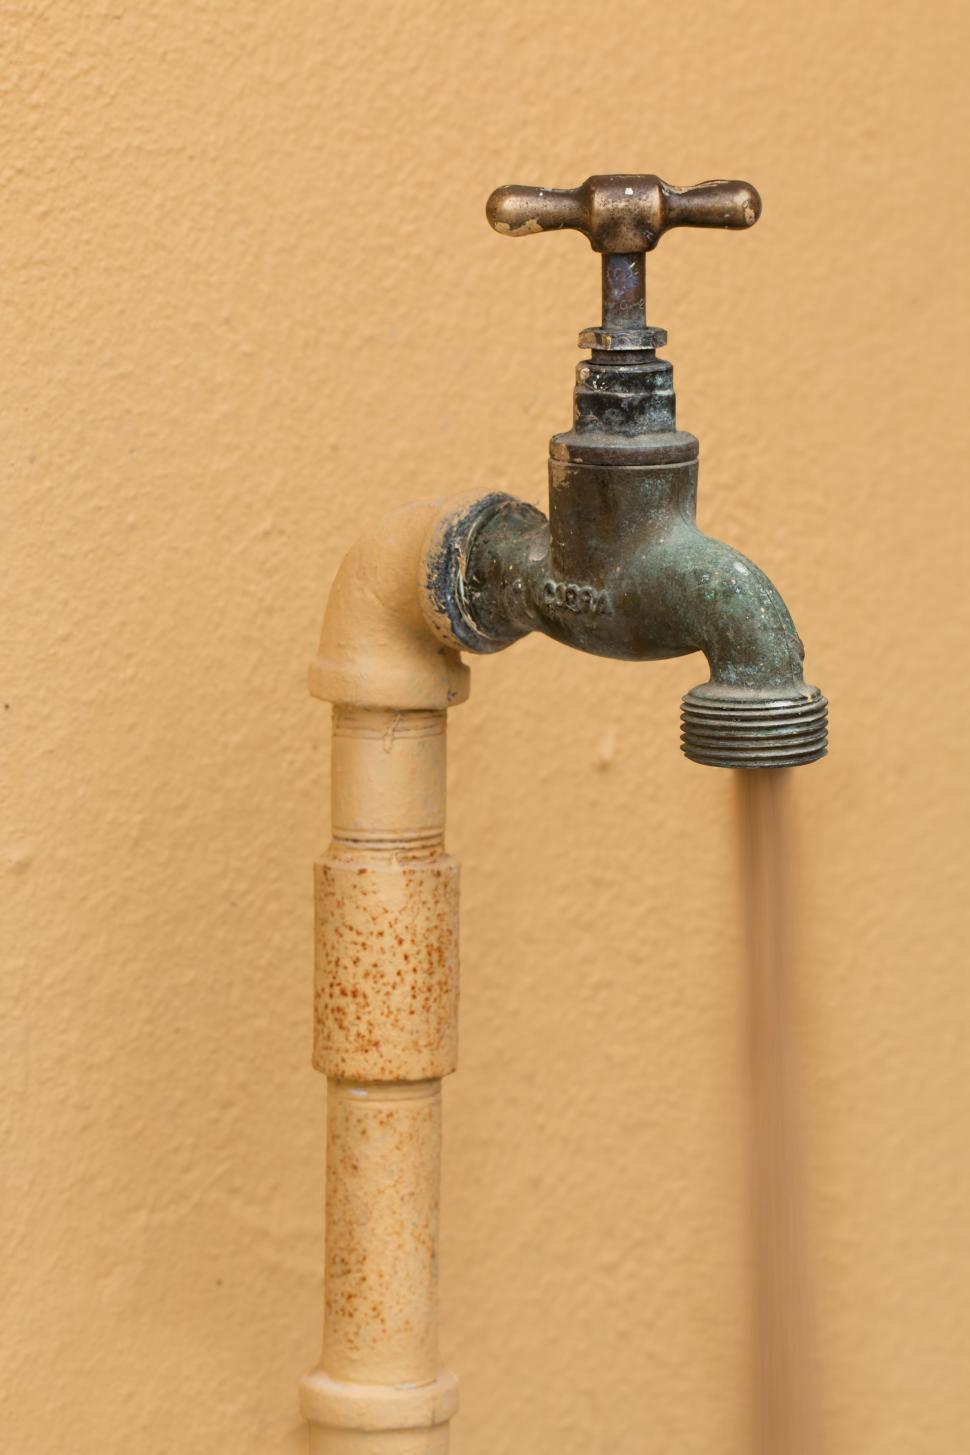 Free Image of Water Faucet With Attached Spigot 